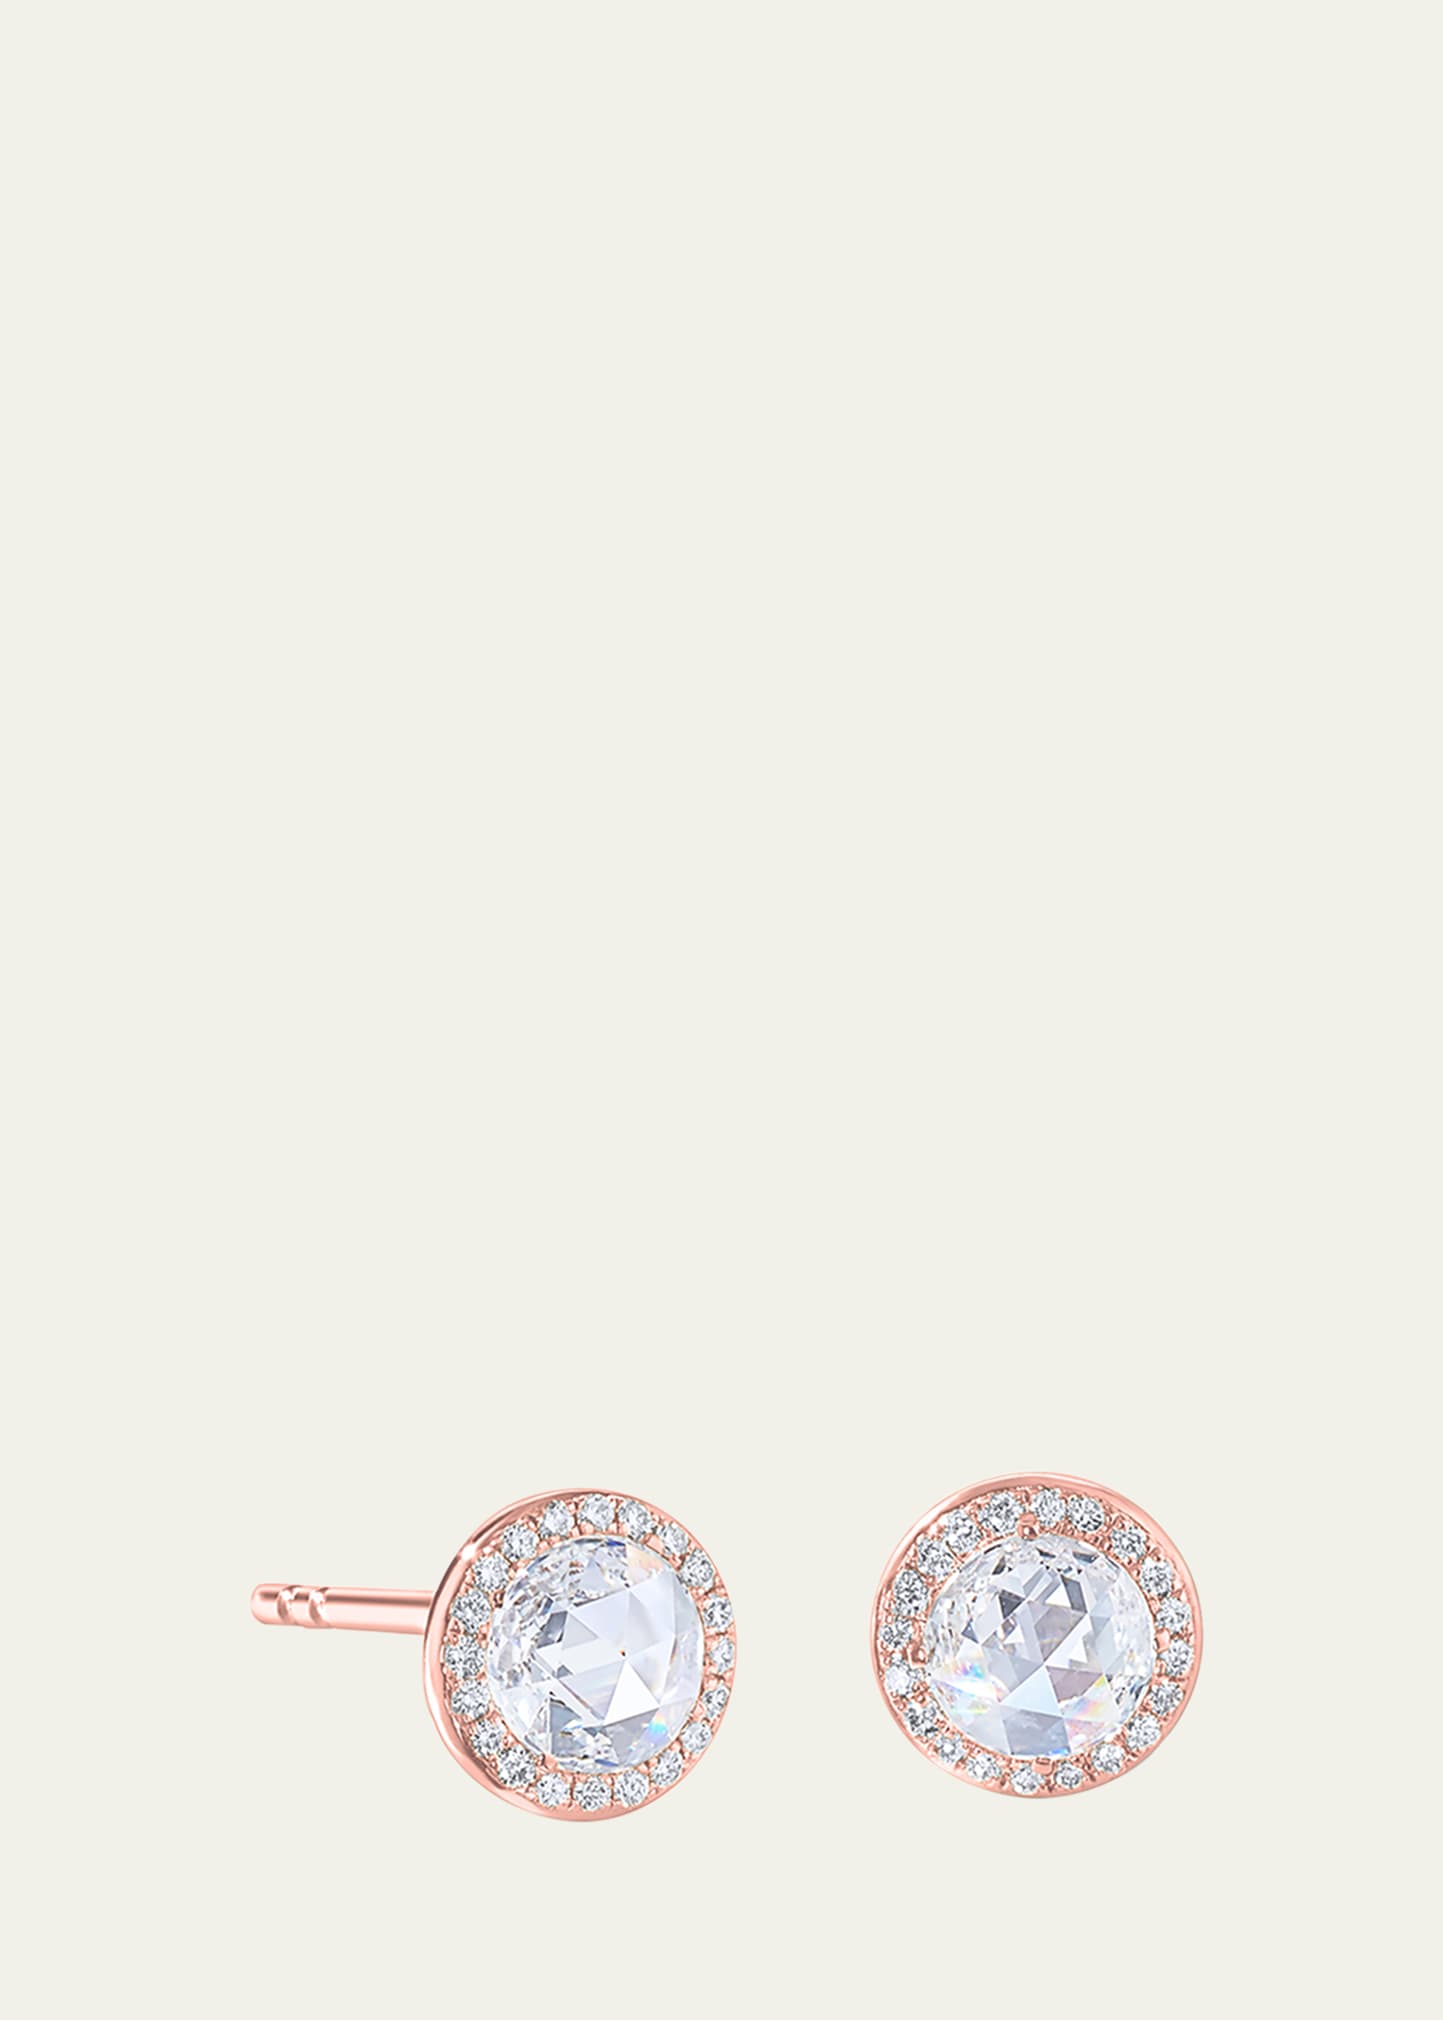 64 Facets 18k Rose Gold Solitaire Stud Earrings With Diamonds